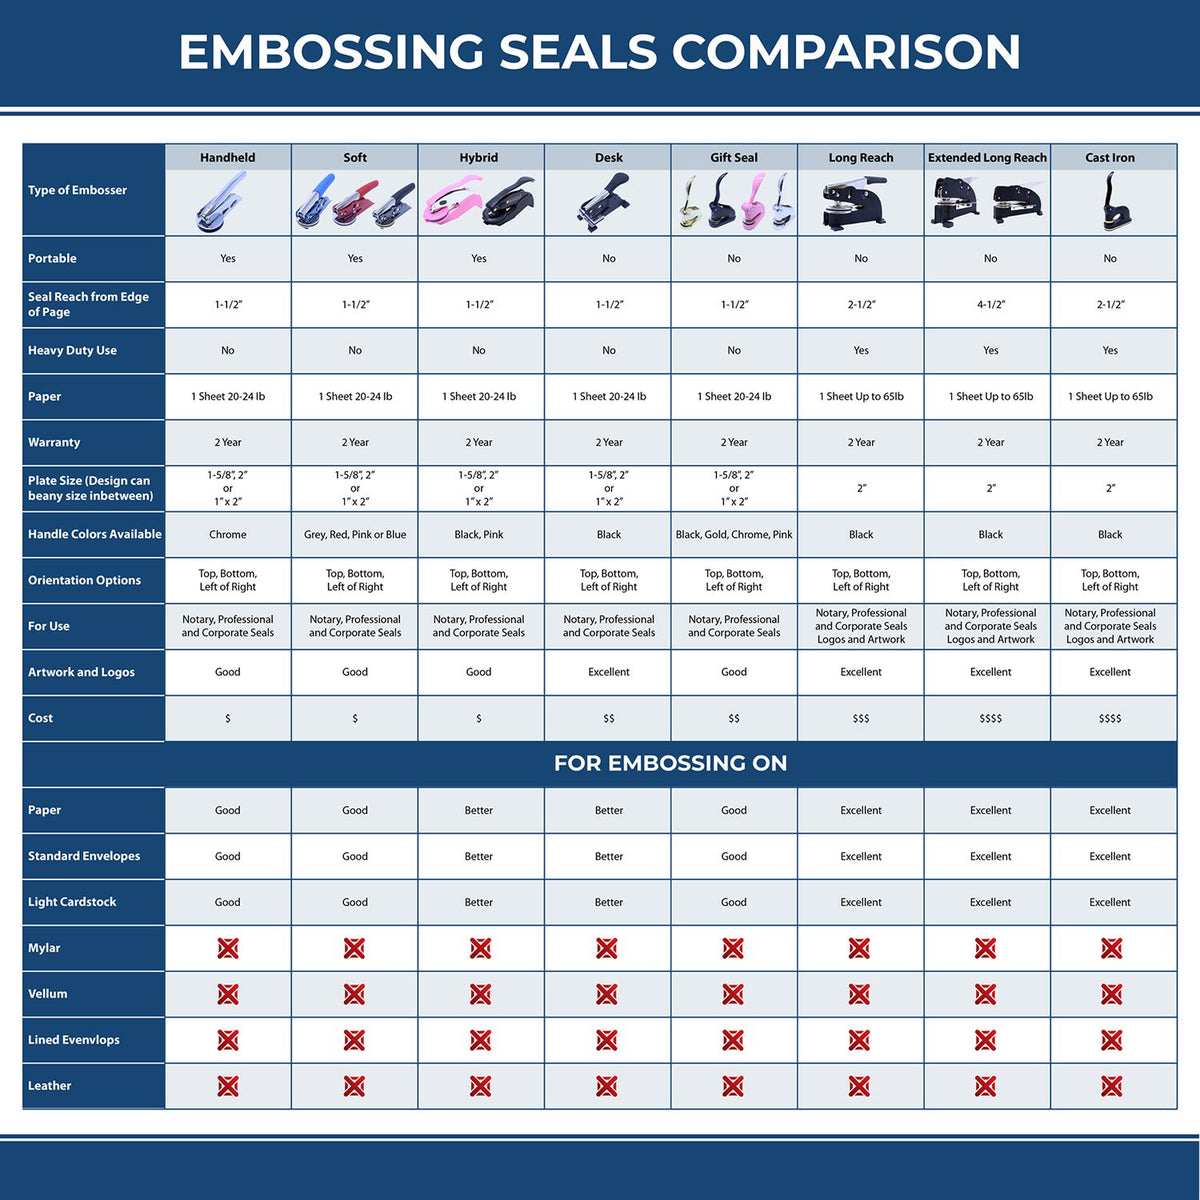 A comparison chart for the different types of mount models available for the Maine Desk Surveyor Seal Embosser.